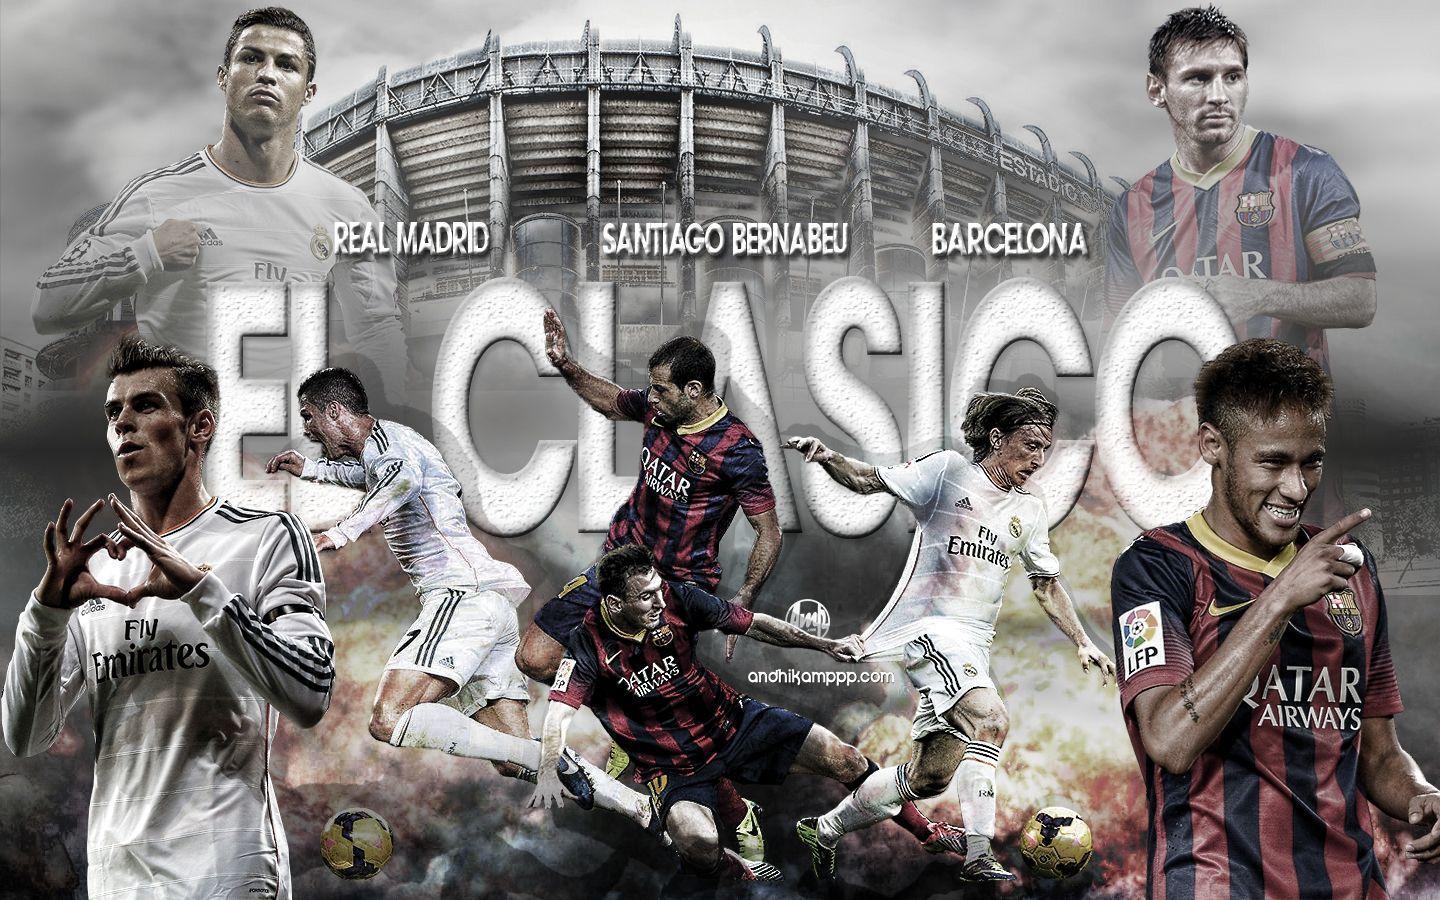 Tag el clasico | Download HD Wallpapers and Free Images